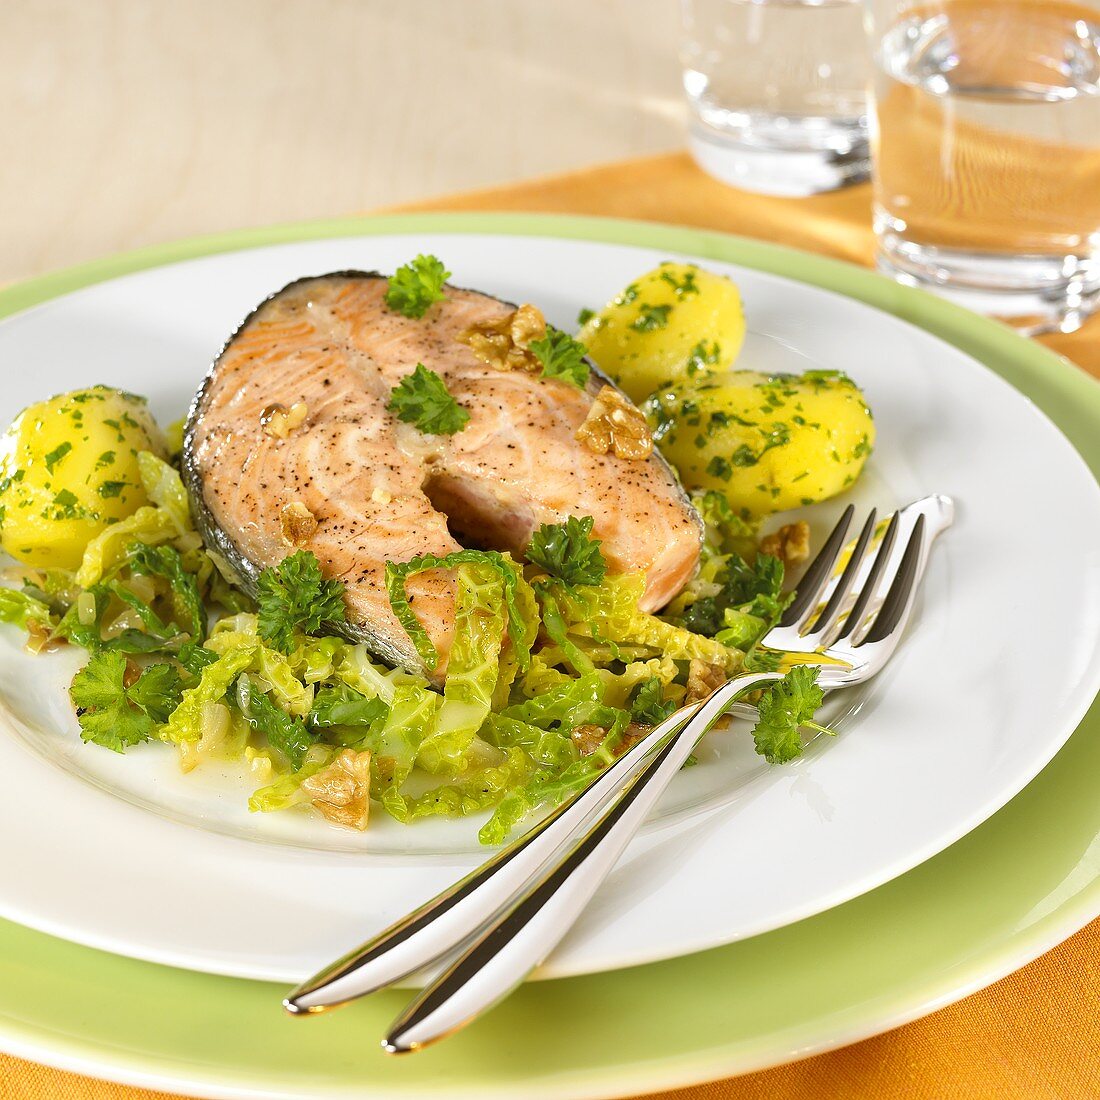 Salmon cutlet with parsley potatoes and savoy